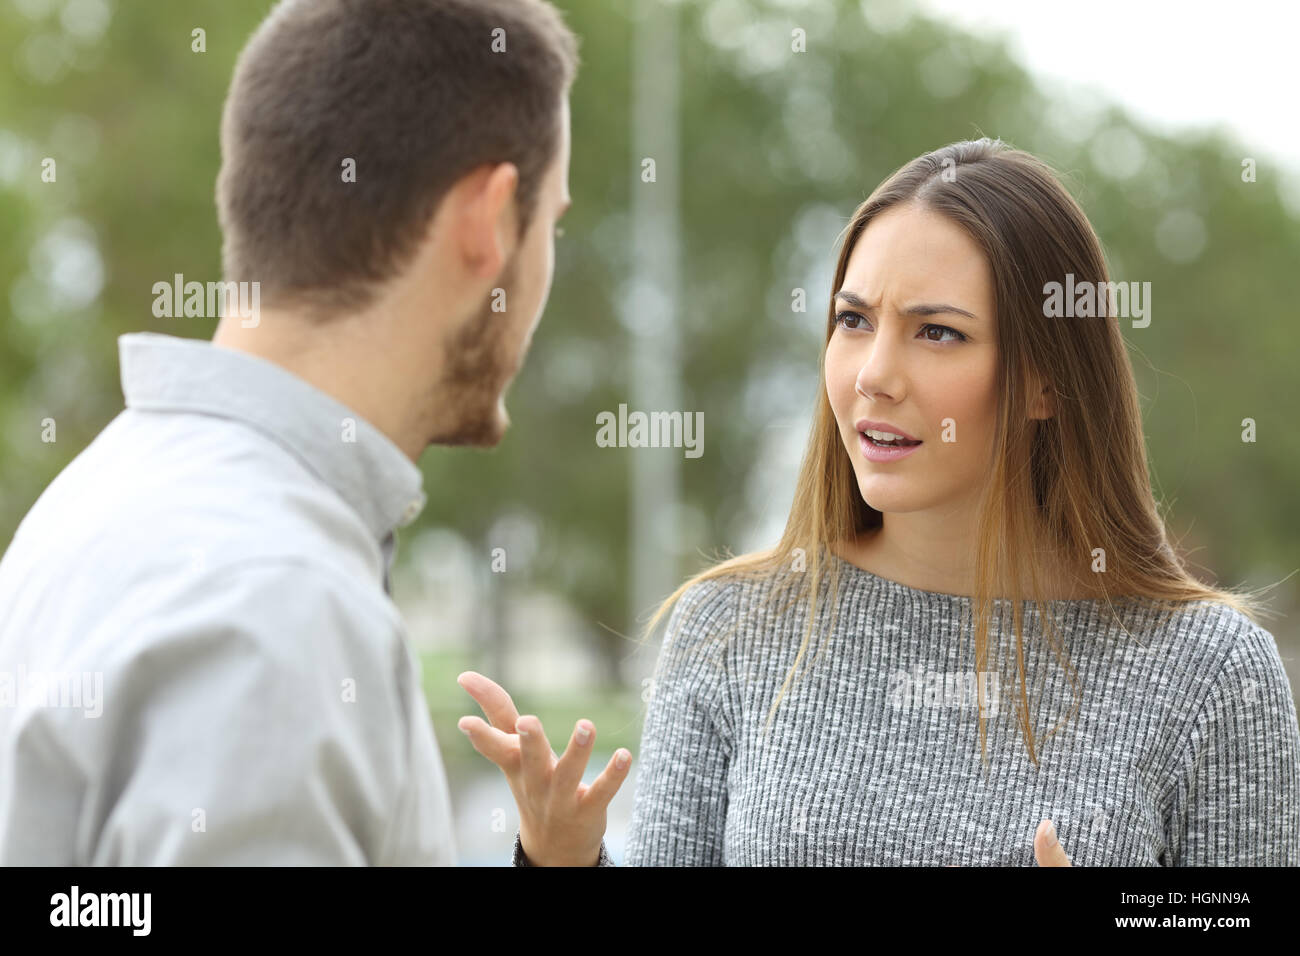 Couple talking seriously outdoors in a park with a green background Stock Photo